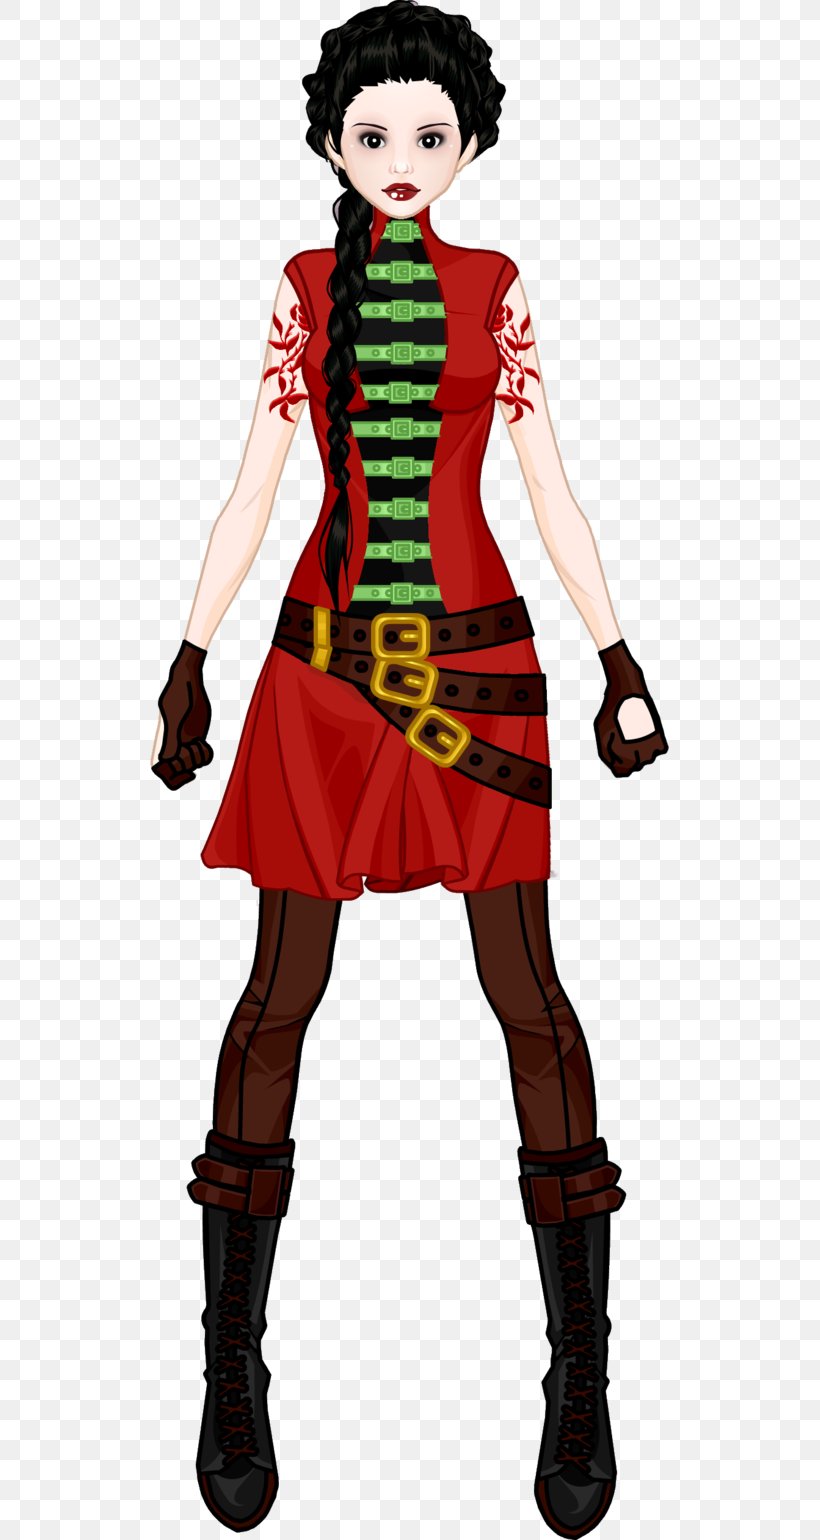 Costume Design Character Fiction, PNG, 519x1540px, Costume, Character, Clothing, Costume Design, Fiction Download Free